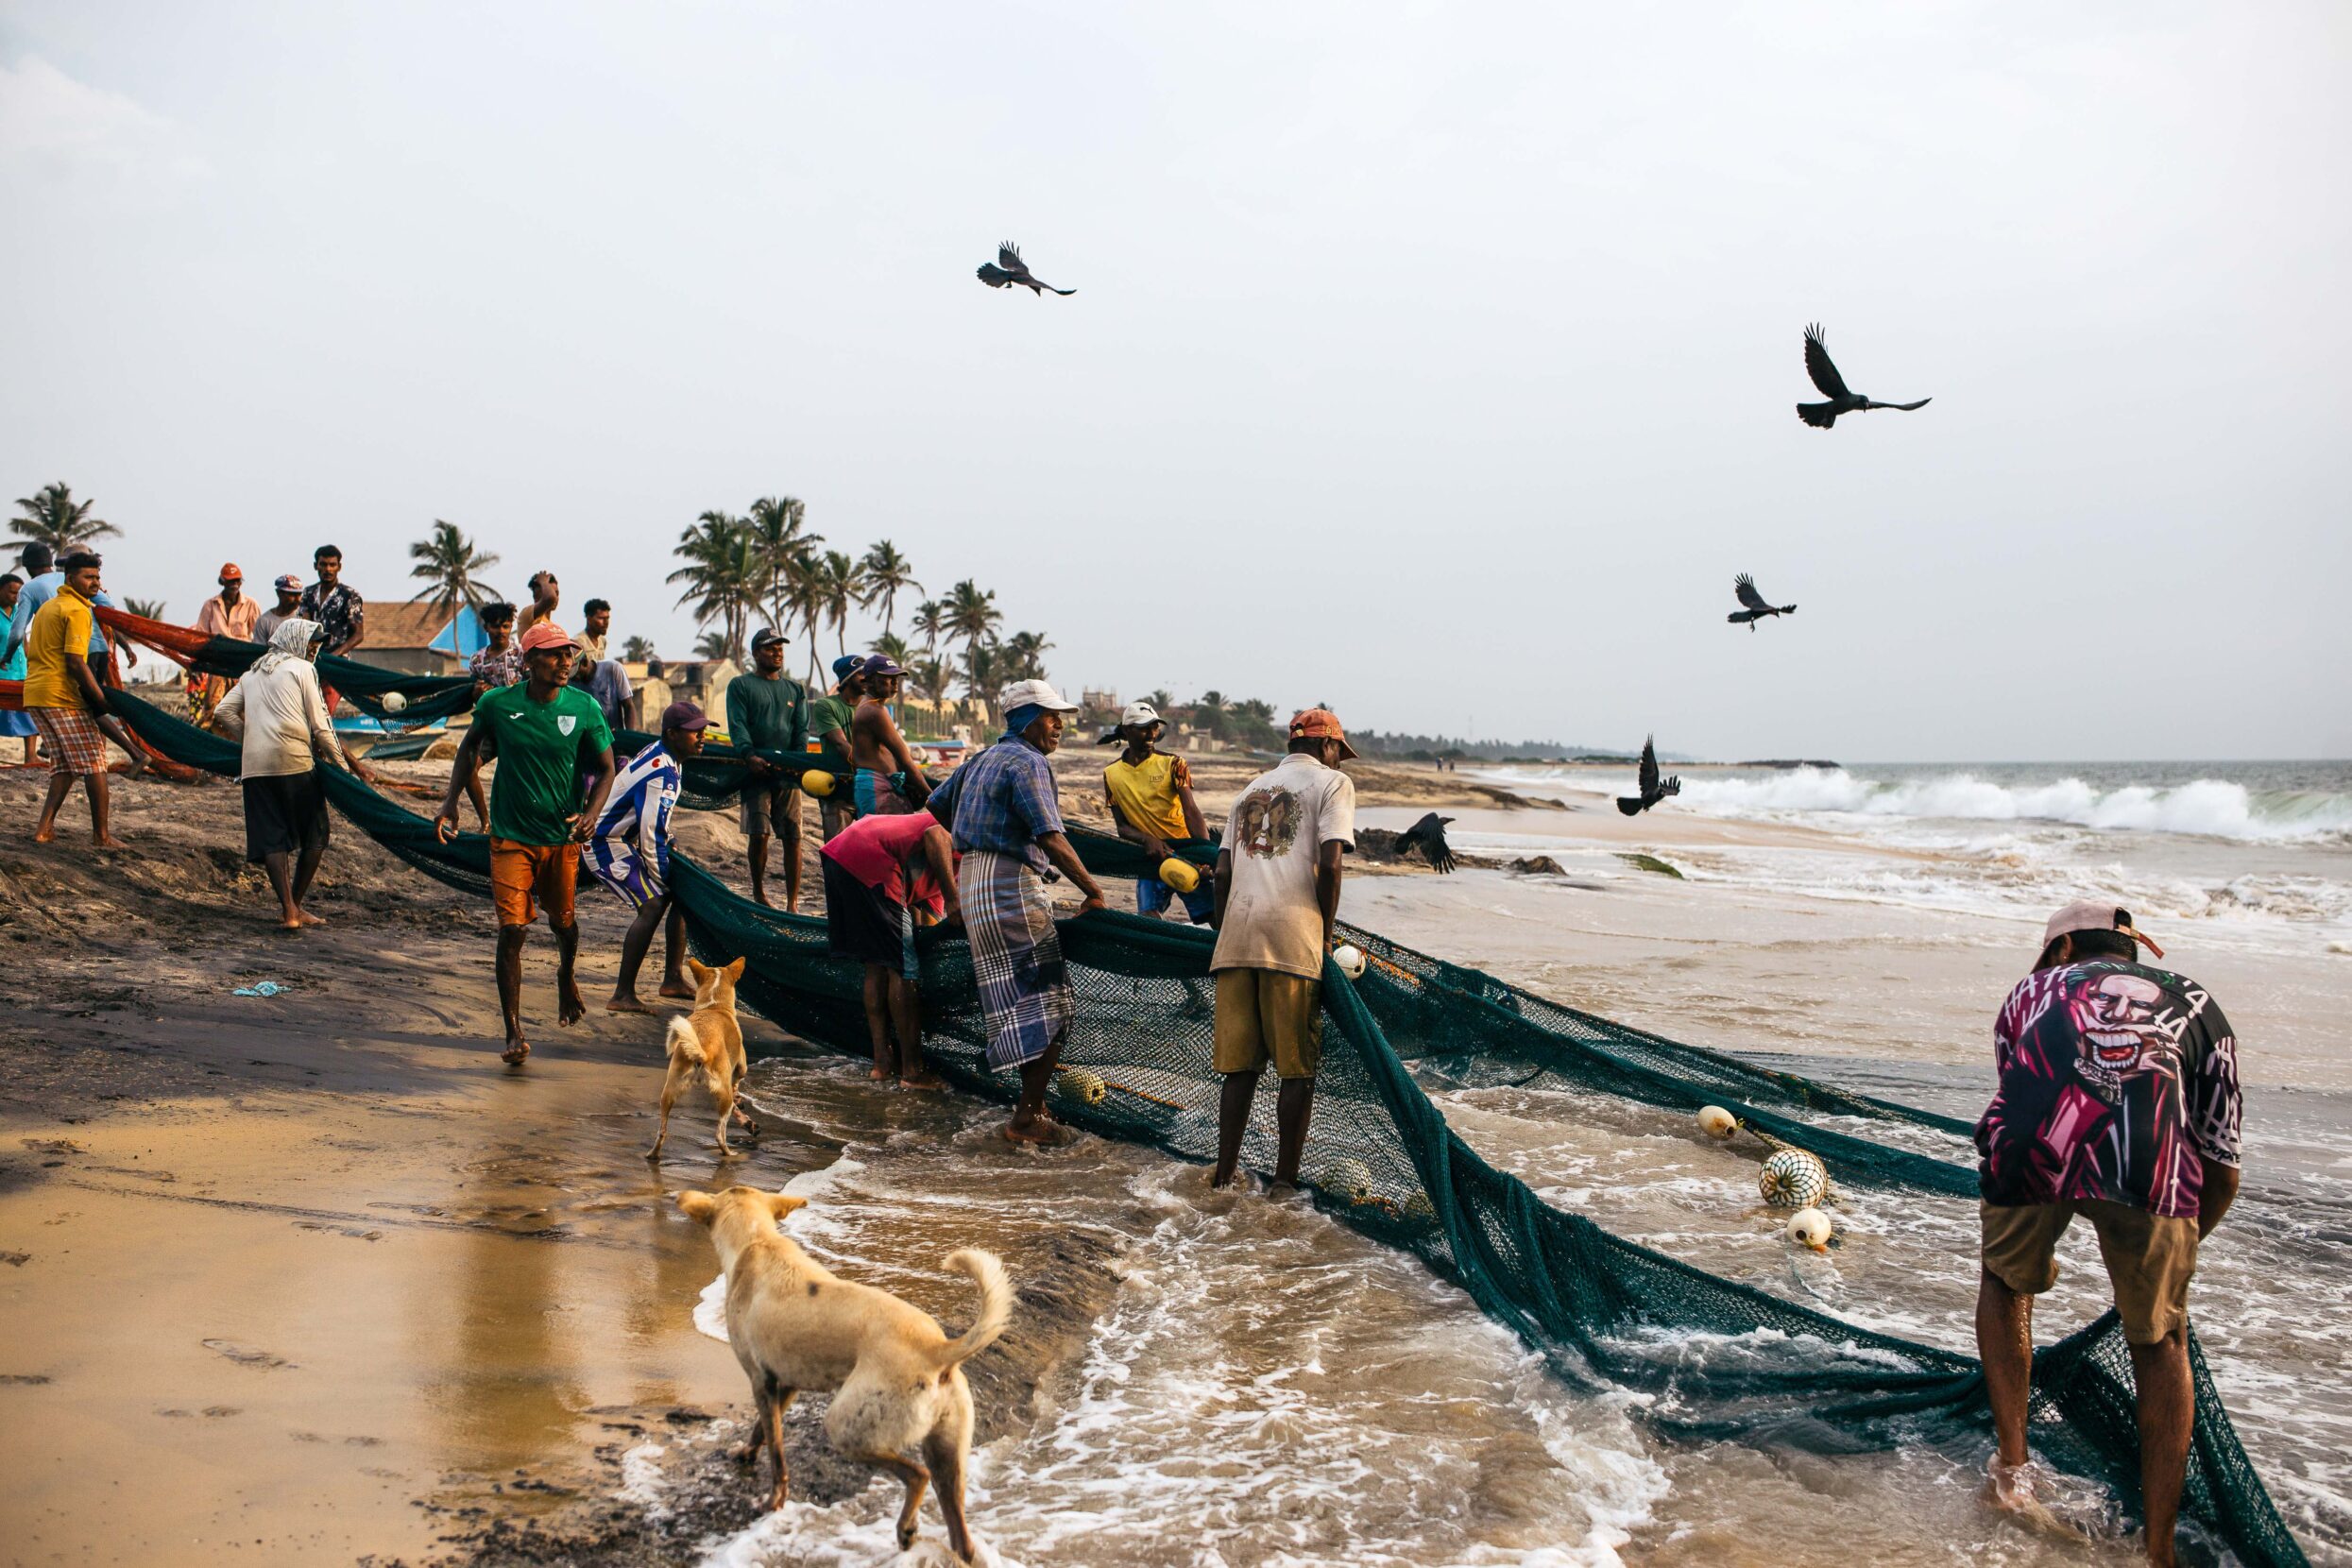 A group of fishermen at the ocean's edge maneuver a large fish net, as birds and dogs mill around them.